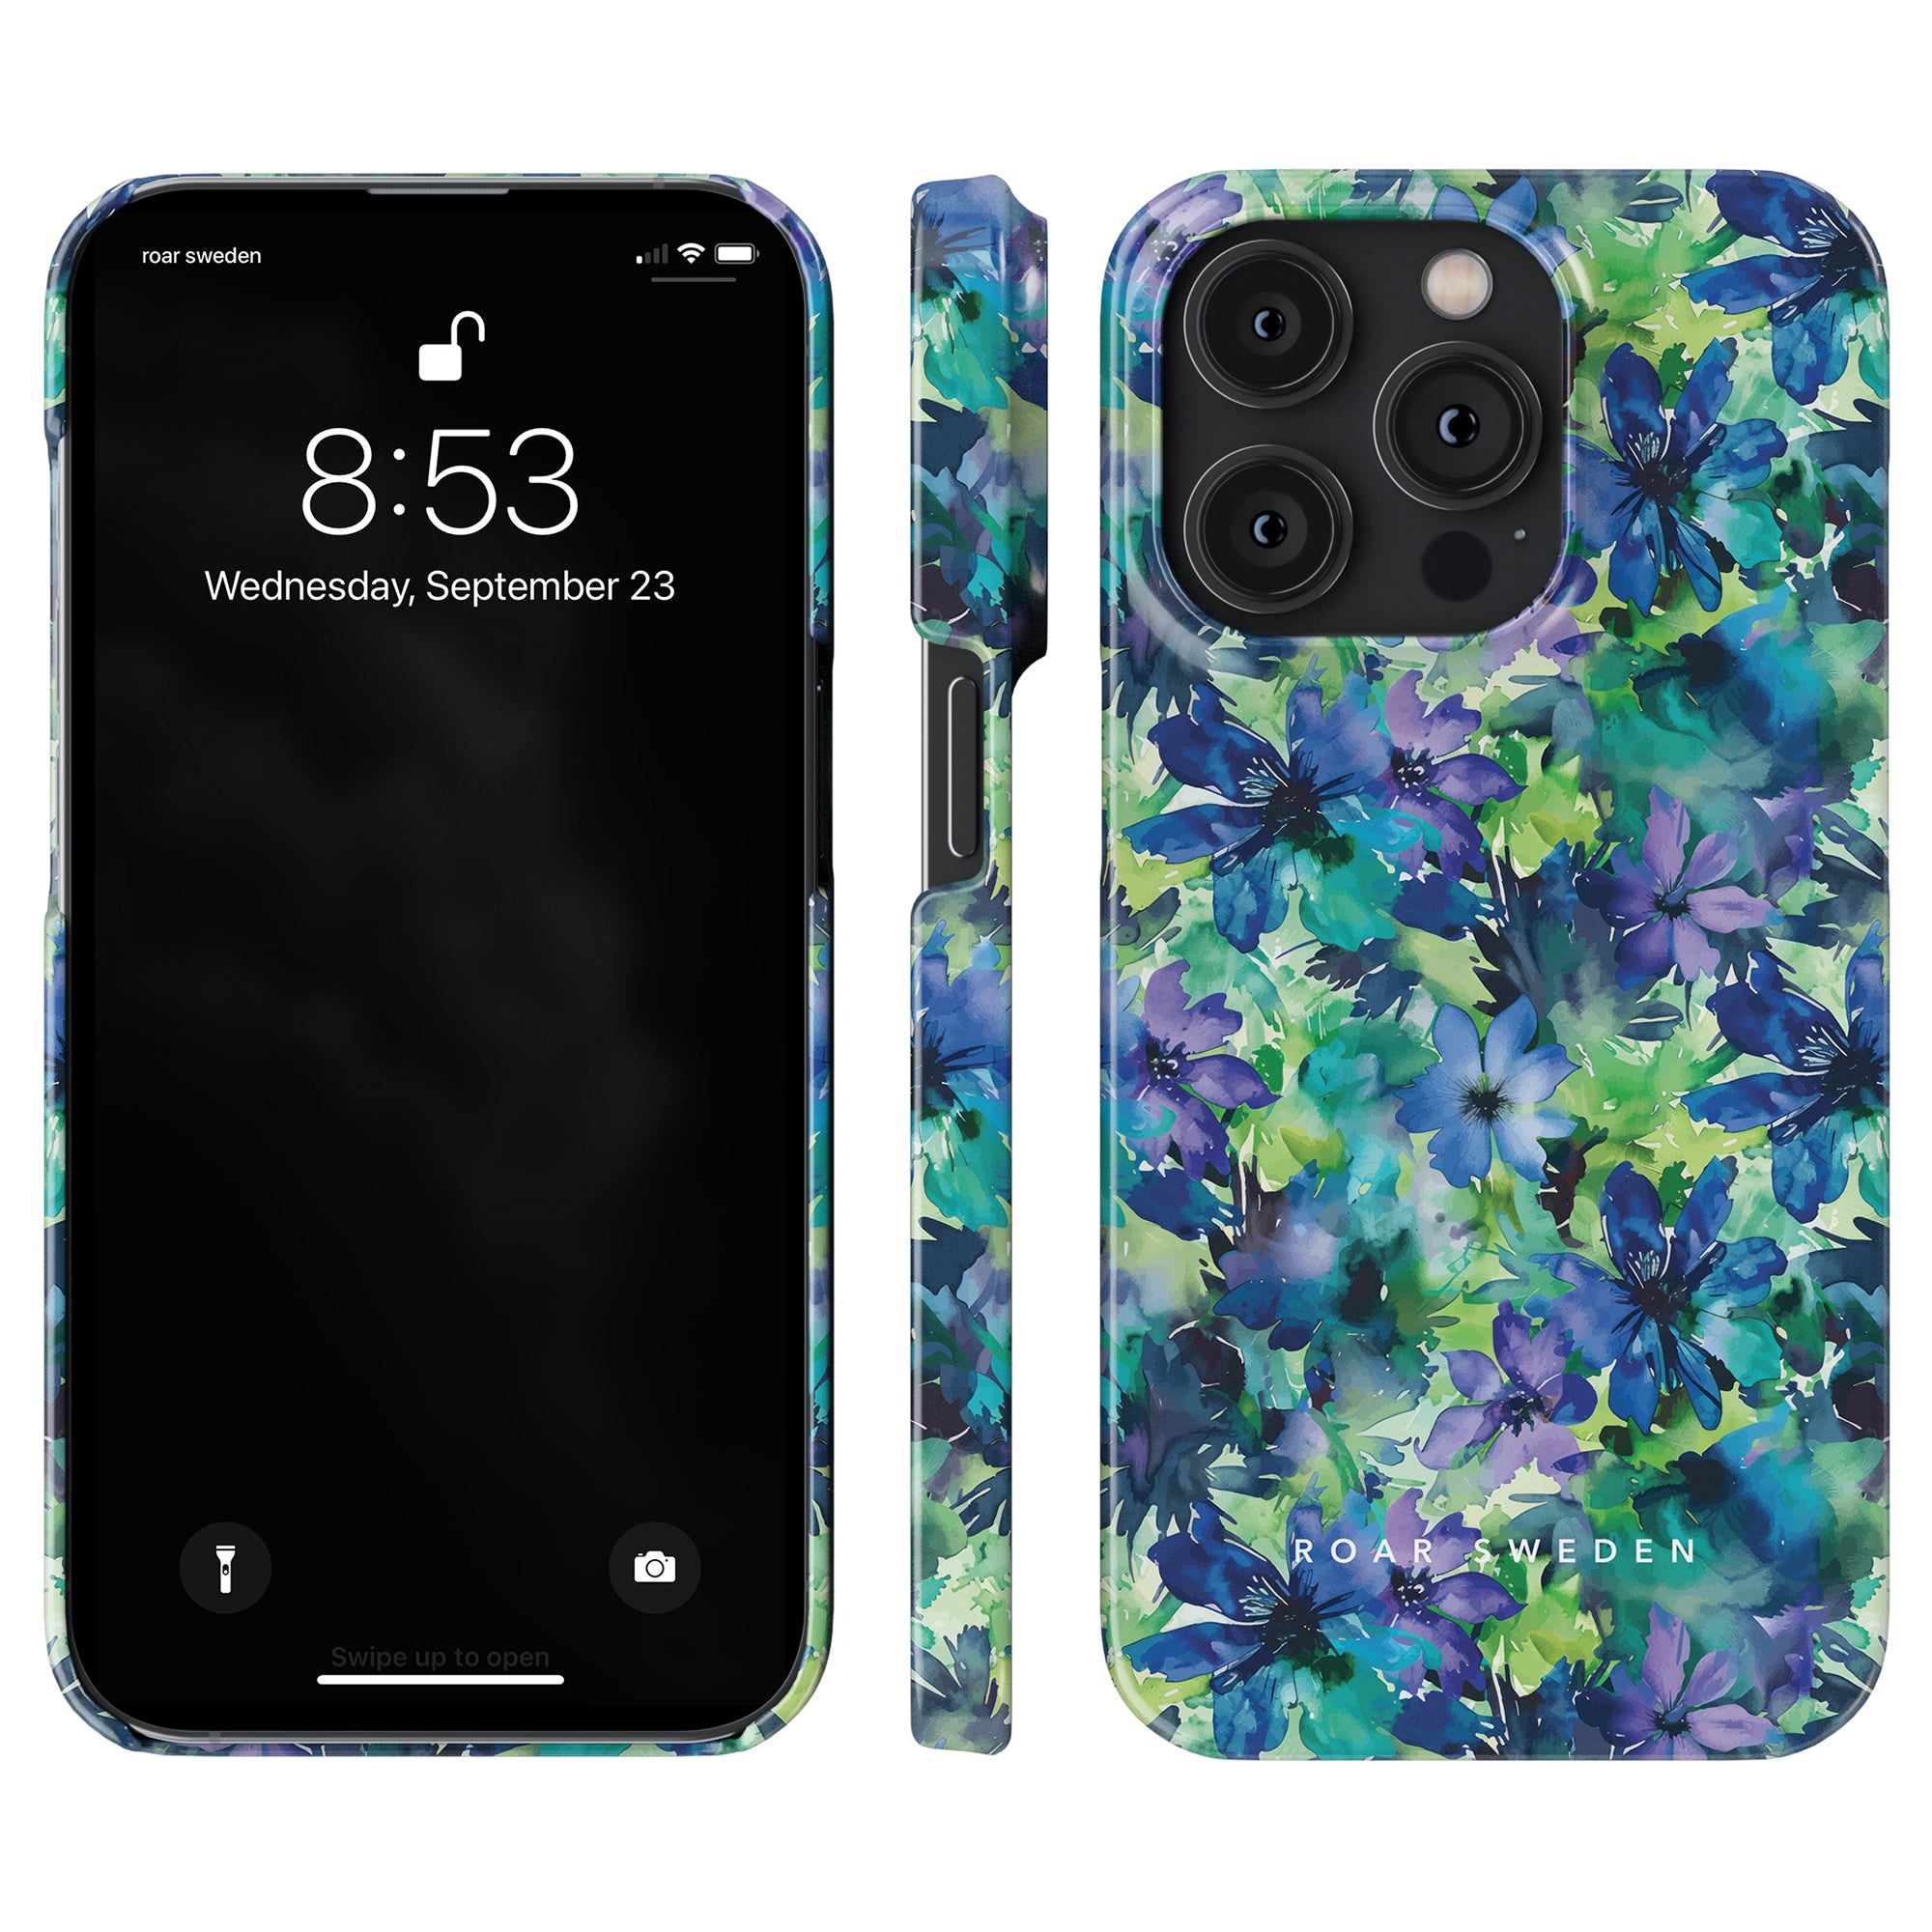 Sweet Flower - Slim case shown from three angles: front, side, and back. The time on the screen reads 8:53 with the date Wednesday, September 23. Part of the Floral Collection, the case features blue and green flowers in a beautiful blommönster design.